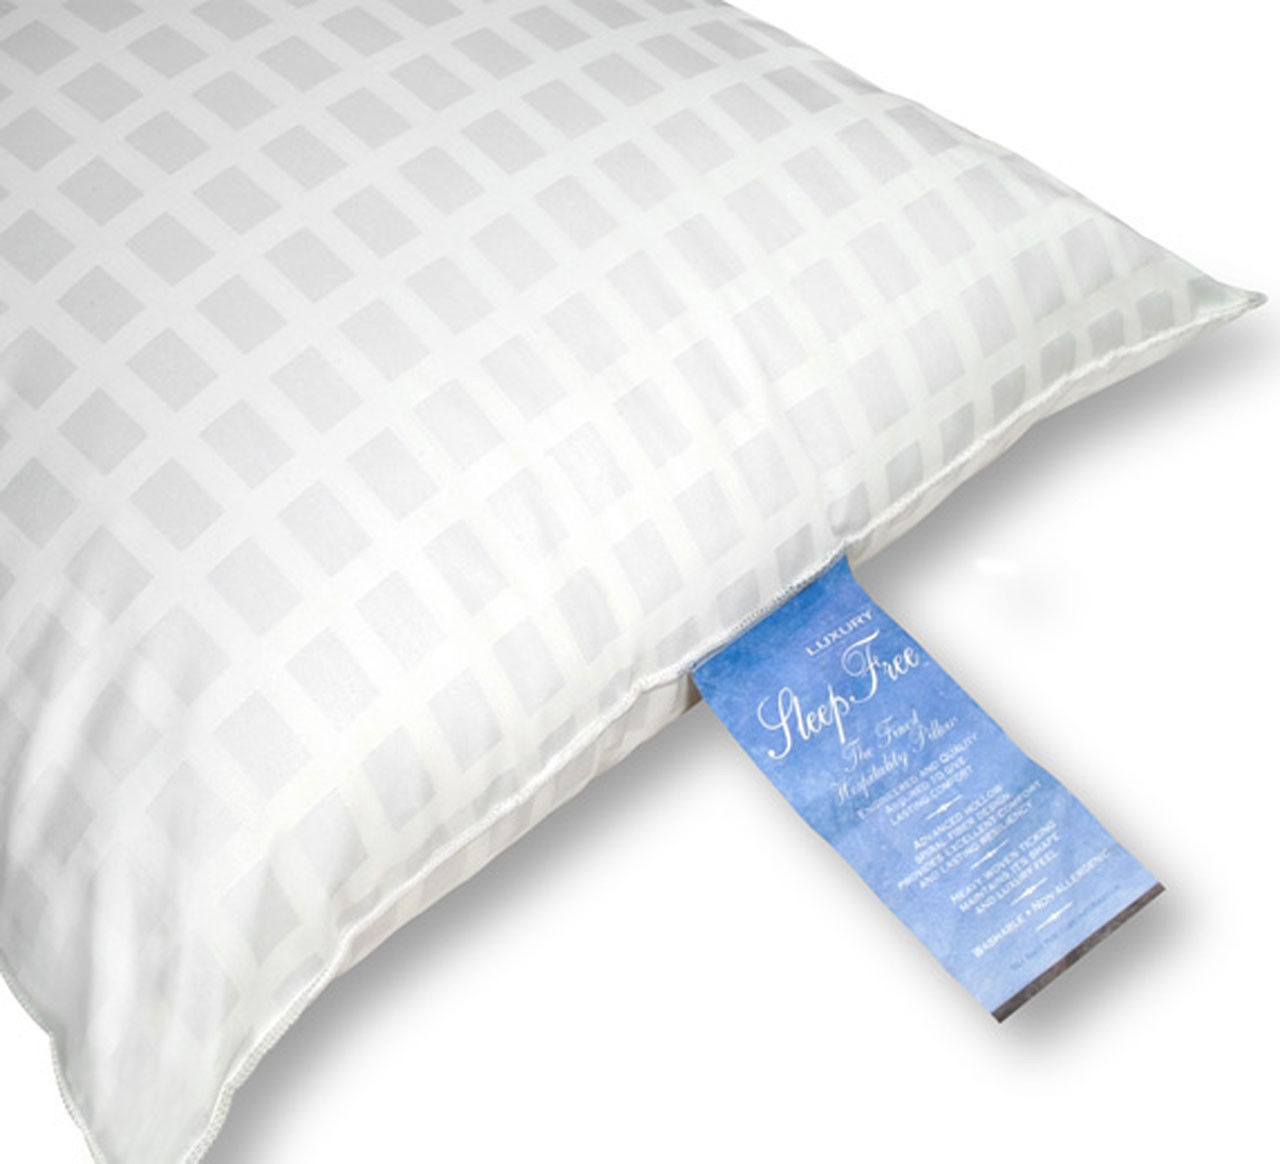 What are the available dimensions for the Sleep Free Pillow?